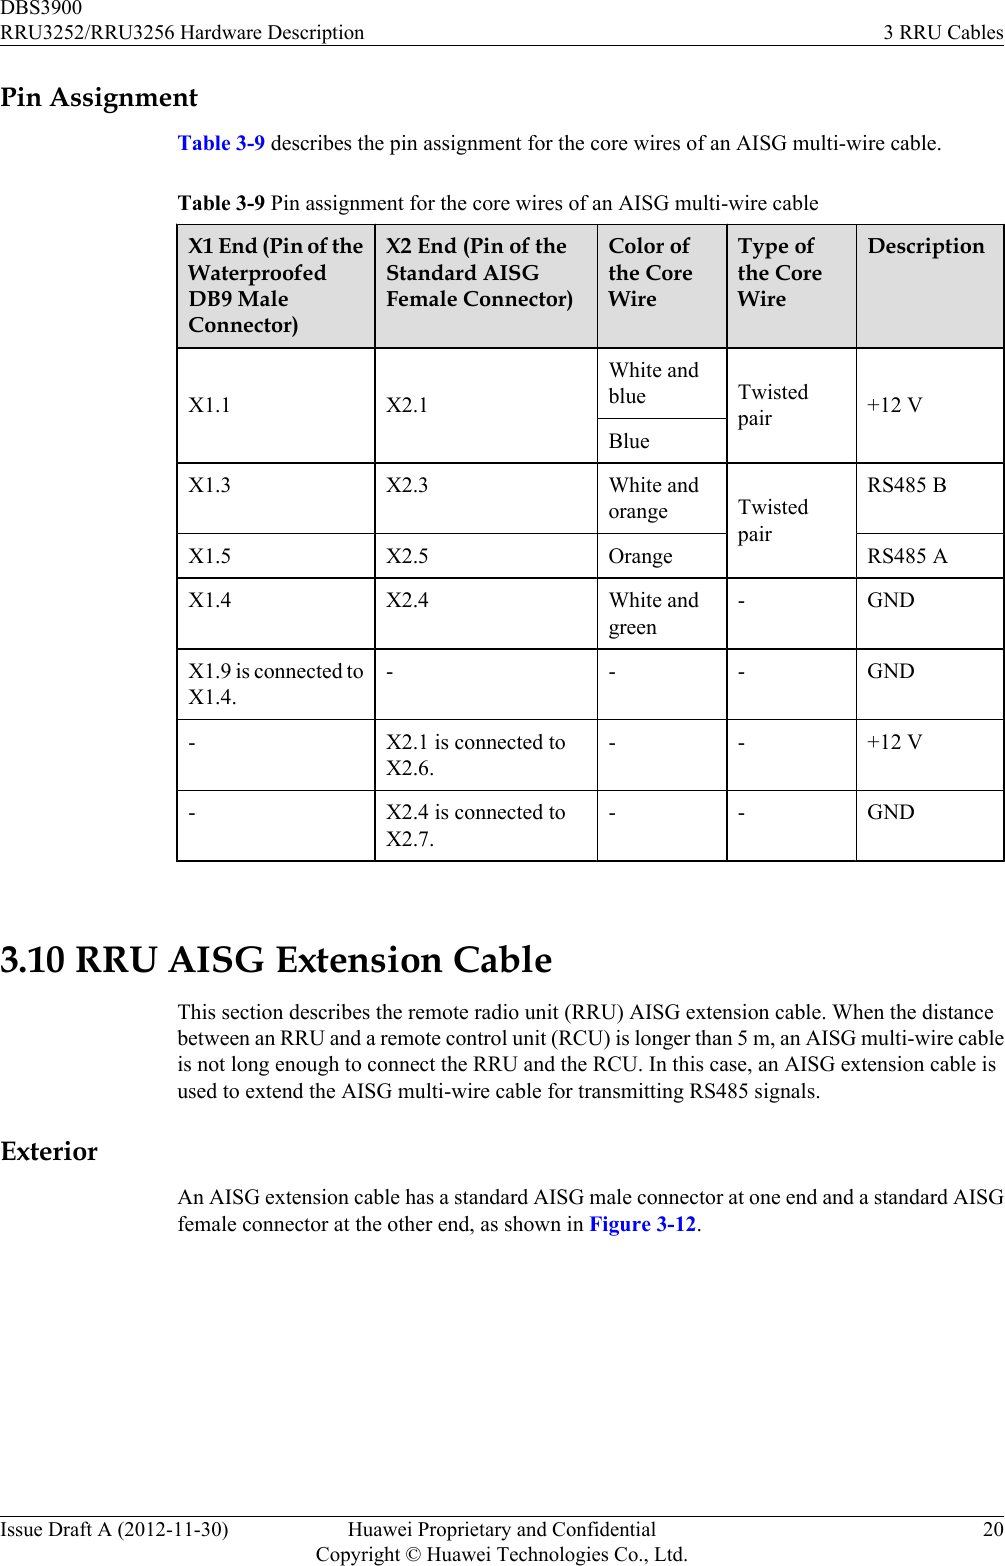 Pin AssignmentTable 3-9 describes the pin assignment for the core wires of an AISG multi-wire cable.Table 3-9 Pin assignment for the core wires of an AISG multi-wire cableX1 End (Pin of theWaterproofedDB9 MaleConnector)X2 End (Pin of theStandard AISGFemale Connector)Color ofthe CoreWireType ofthe CoreWireDescriptionX1.1 X2.1White andblue Twistedpair +12 VBlueX1.3 X2.3 White andorange TwistedpairRS485 BX1.5 X2.5 Orange RS485 AX1.4 X2.4 White andgreen- GNDX1.9 is connected toX1.4.- - - GND- X2.1 is connected toX2.6.- - +12 V- X2.4 is connected toX2.7.- - GND 3.10 RRU AISG Extension CableThis section describes the remote radio unit (RRU) AISG extension cable. When the distancebetween an RRU and a remote control unit (RCU) is longer than 5 m, an AISG multi-wire cableis not long enough to connect the RRU and the RCU. In this case, an AISG extension cable isused to extend the AISG multi-wire cable for transmitting RS485 signals.ExteriorAn AISG extension cable has a standard AISG male connector at one end and a standard AISGfemale connector at the other end, as shown in Figure 3-12.DBS3900RRU3252/RRU3256 Hardware Description 3 RRU CablesIssue Draft A (2012-11-30) Huawei Proprietary and ConfidentialCopyright © Huawei Technologies Co., Ltd.20